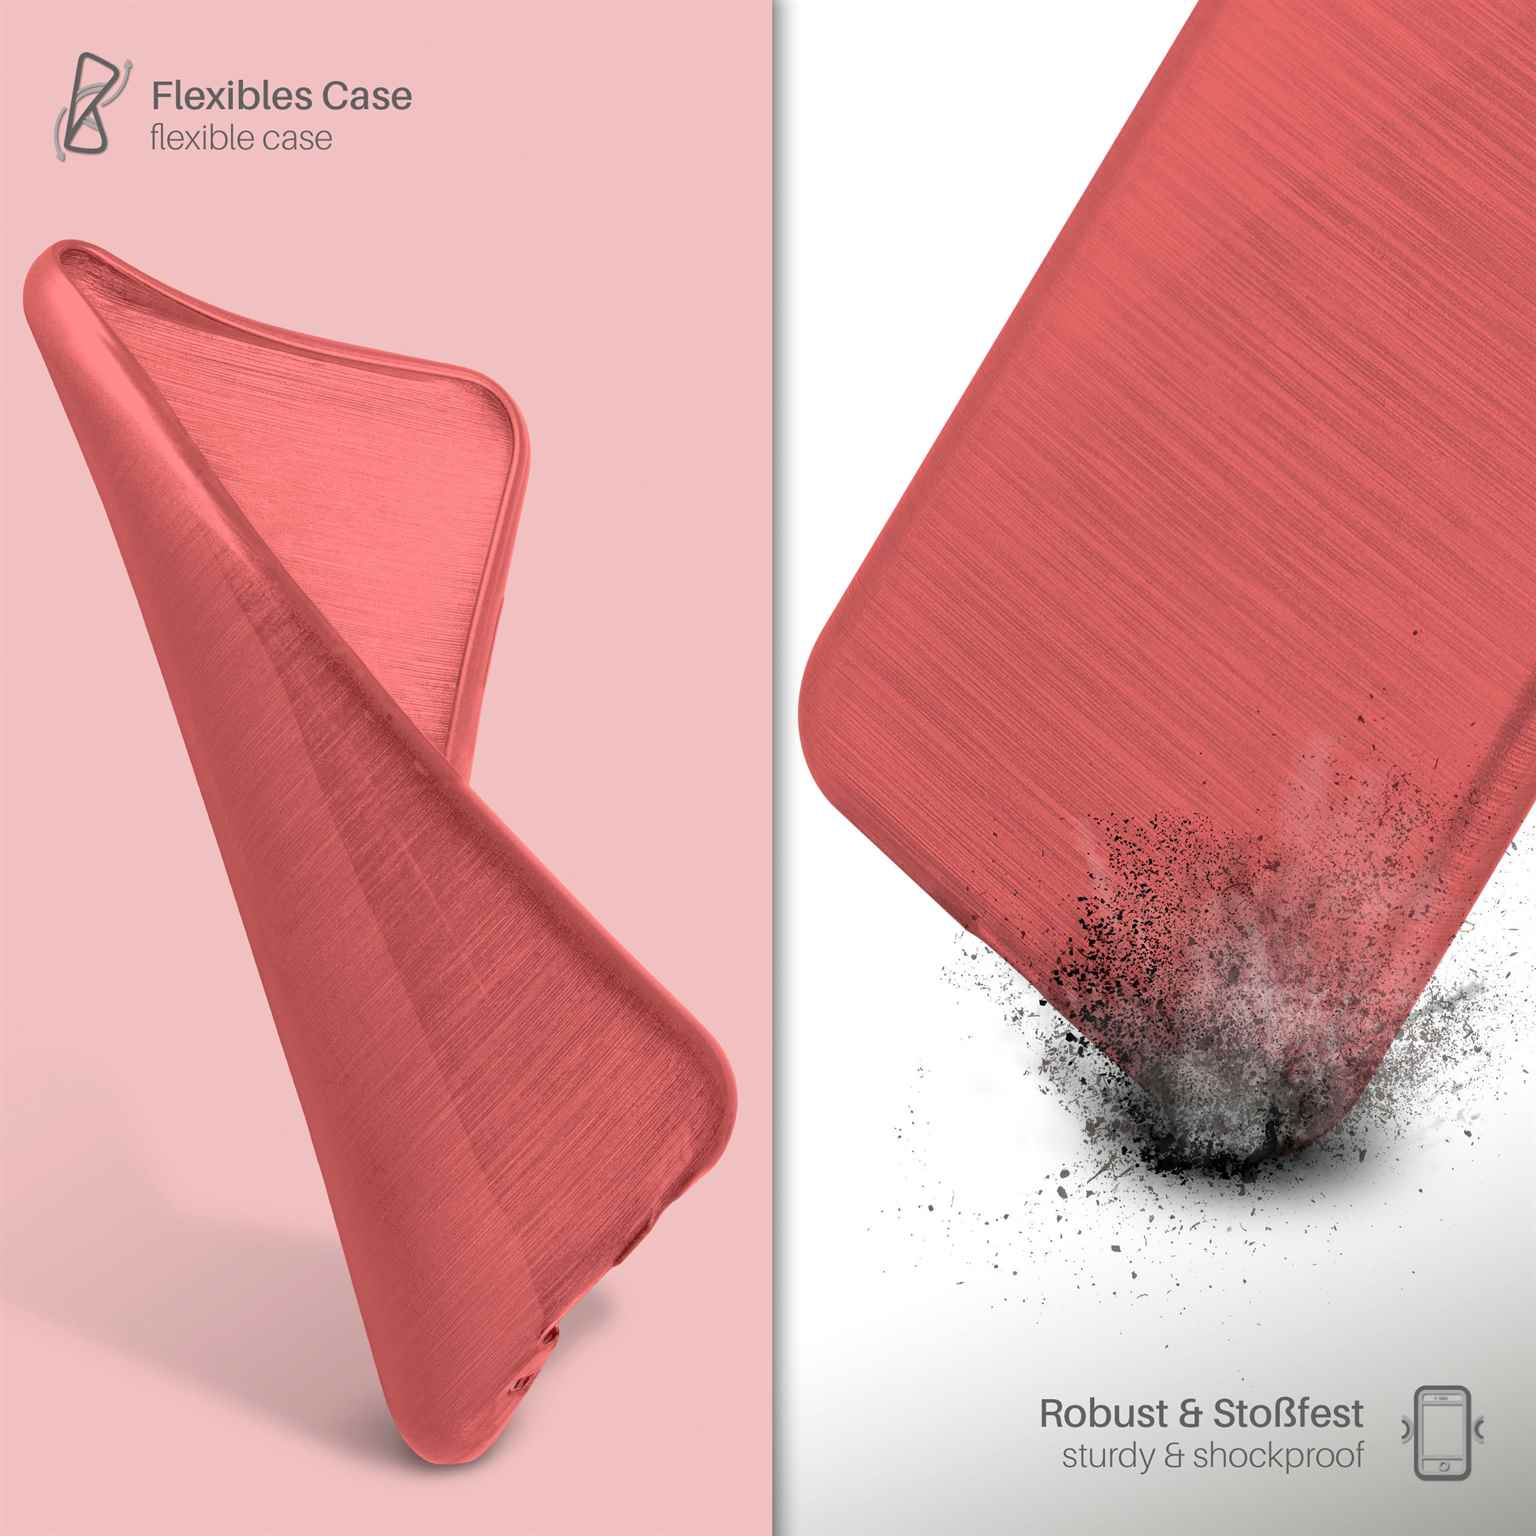 MOEX Brushed iPhone Case, Backcover, 7, Apple, Coral-Red